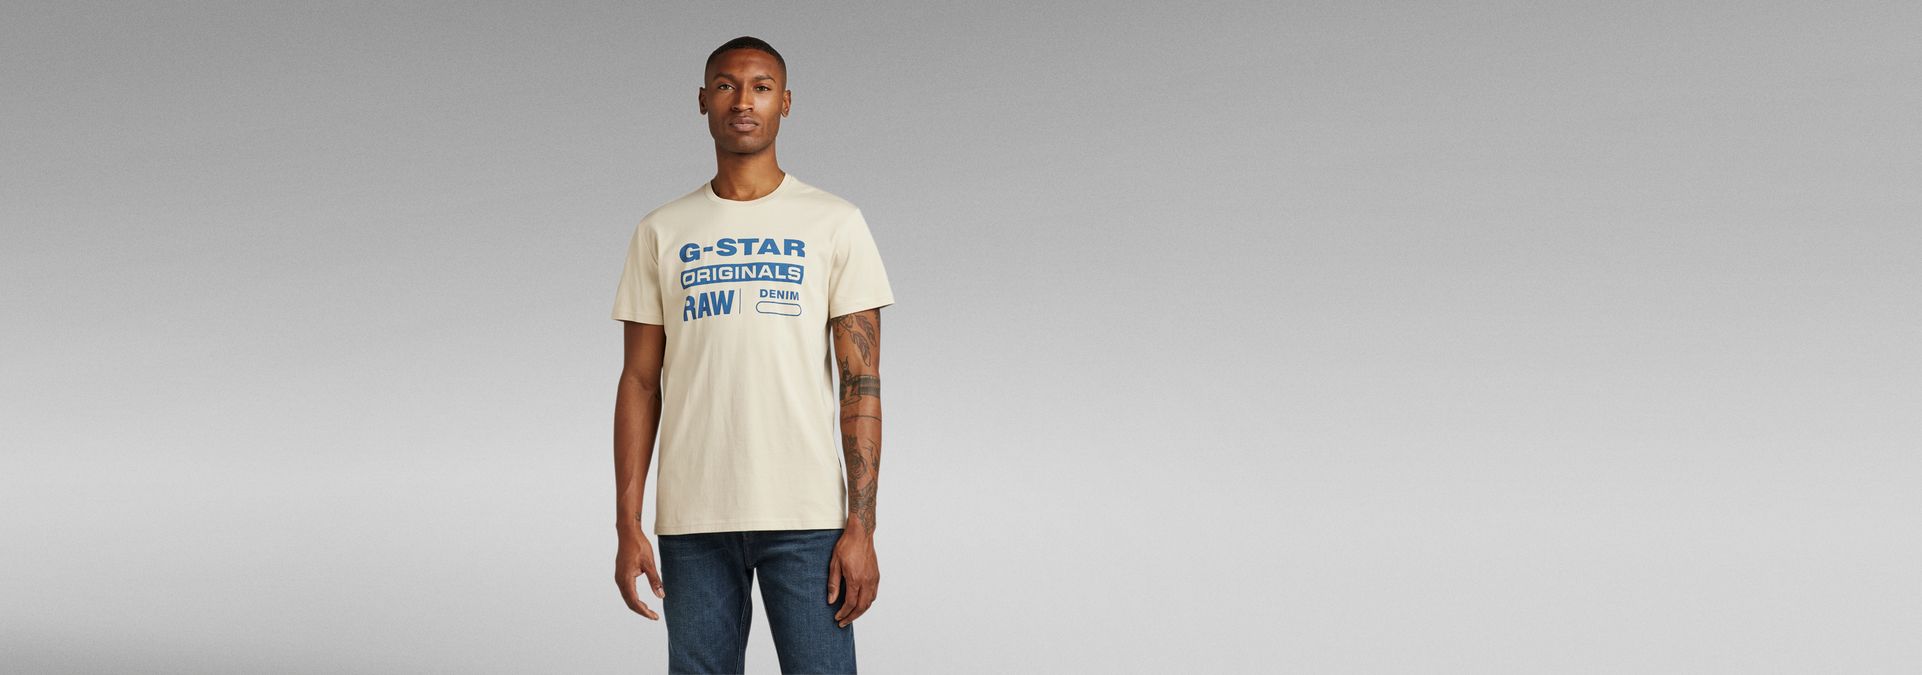 G-Star Compact Patriot Blue Tee – Era Clothing Store